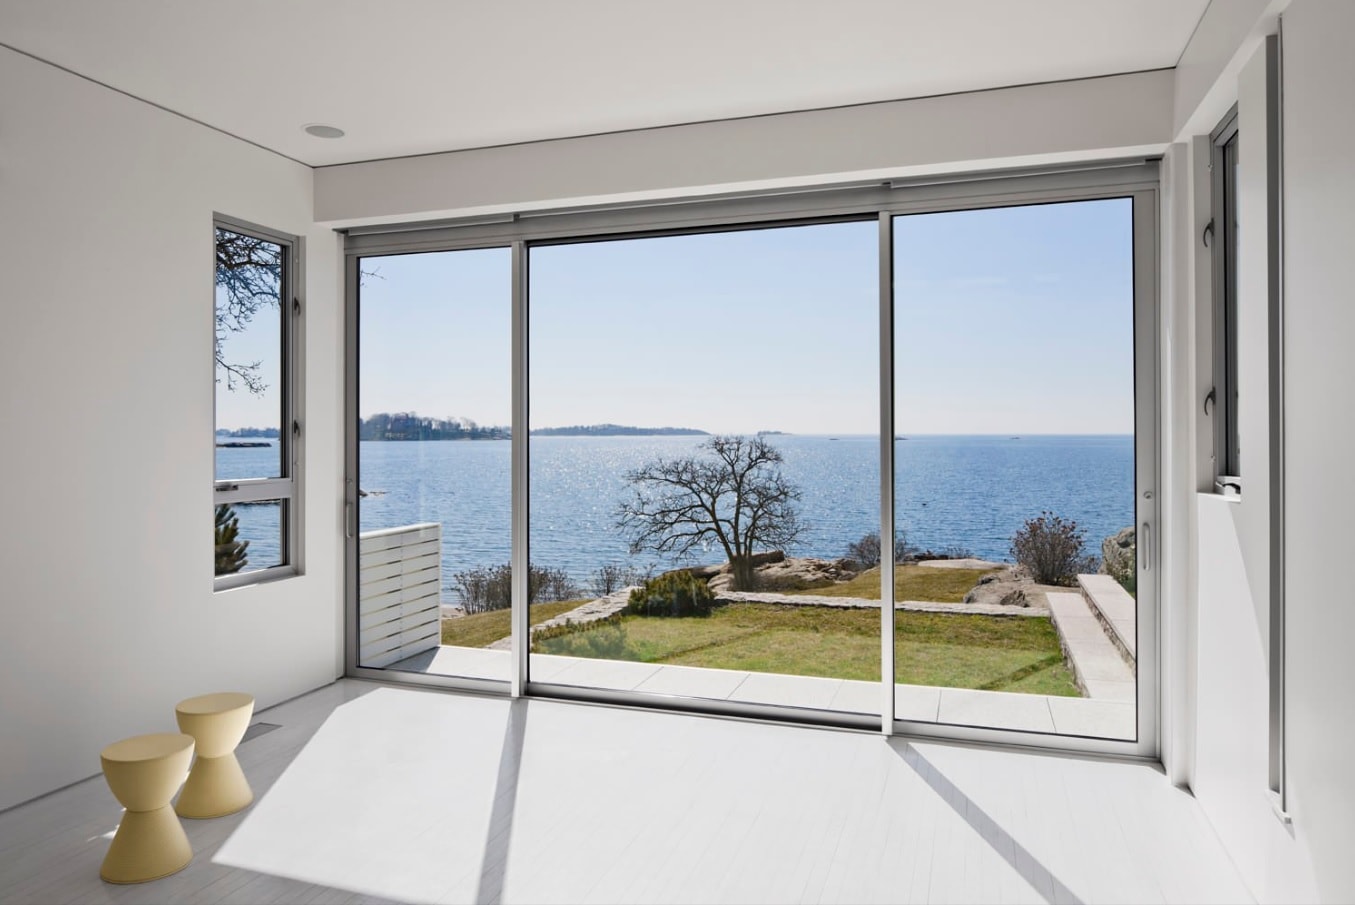 Sliding Glass Doors And Glass Wall Panels In Modern